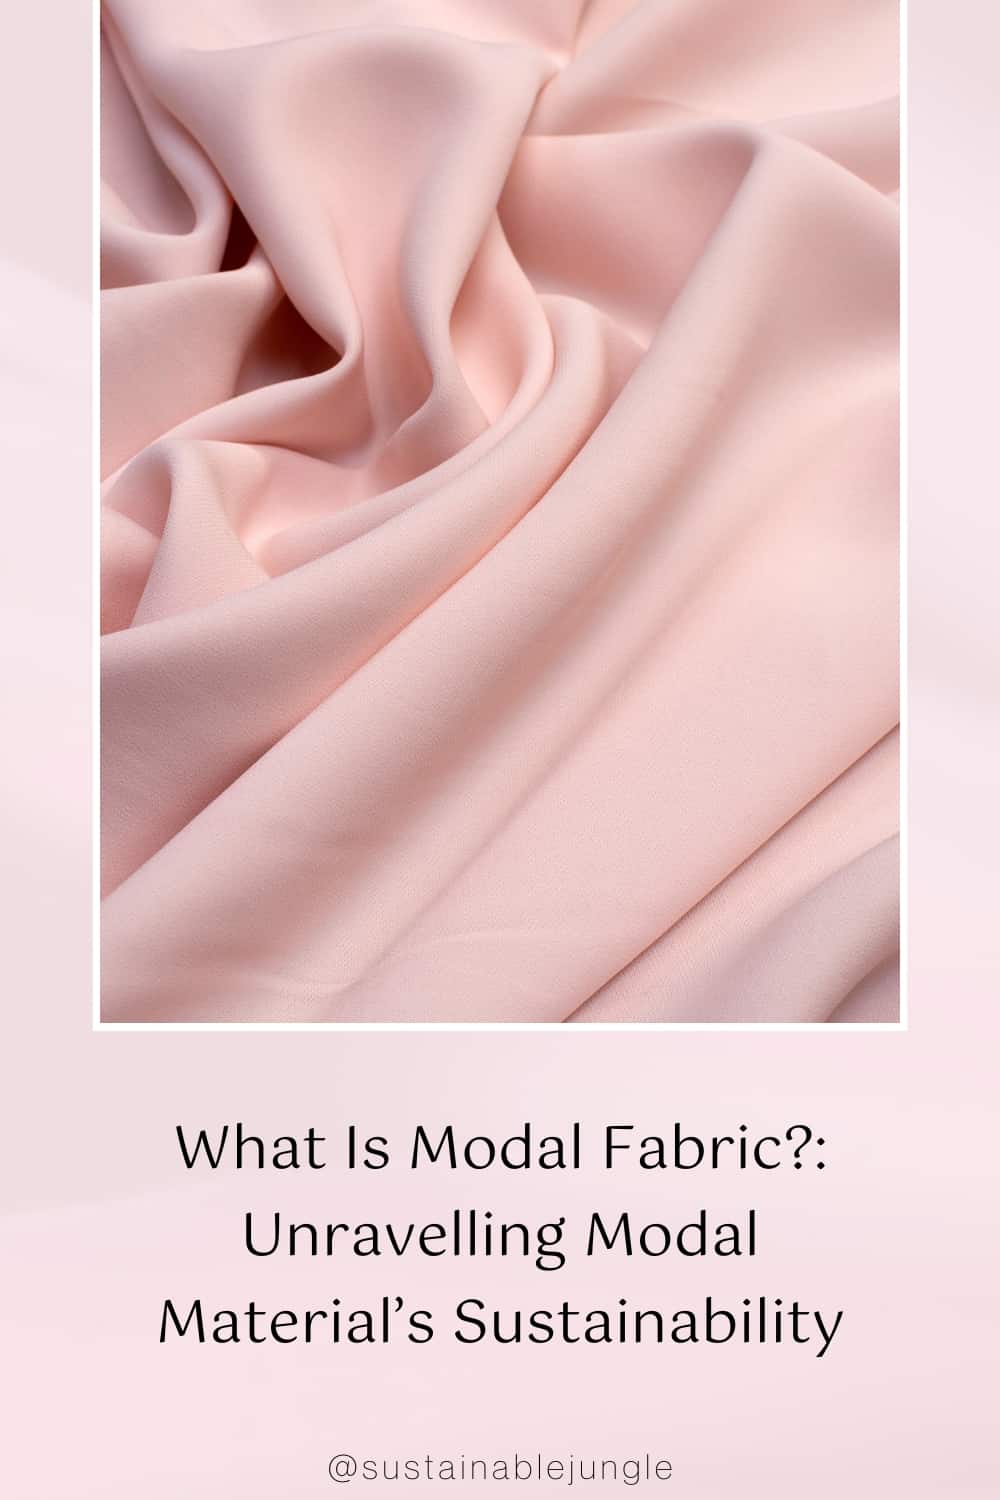 What Is Modal Fabric?: Unravelling Modal Material’s Sustainability Image by dmitri kalvan #modalfabric #hatismodalfabric #whatmaterialismodal #modalmaterial #Lensingmodalfabric #modalfabricprosandcons #sustainablejungle